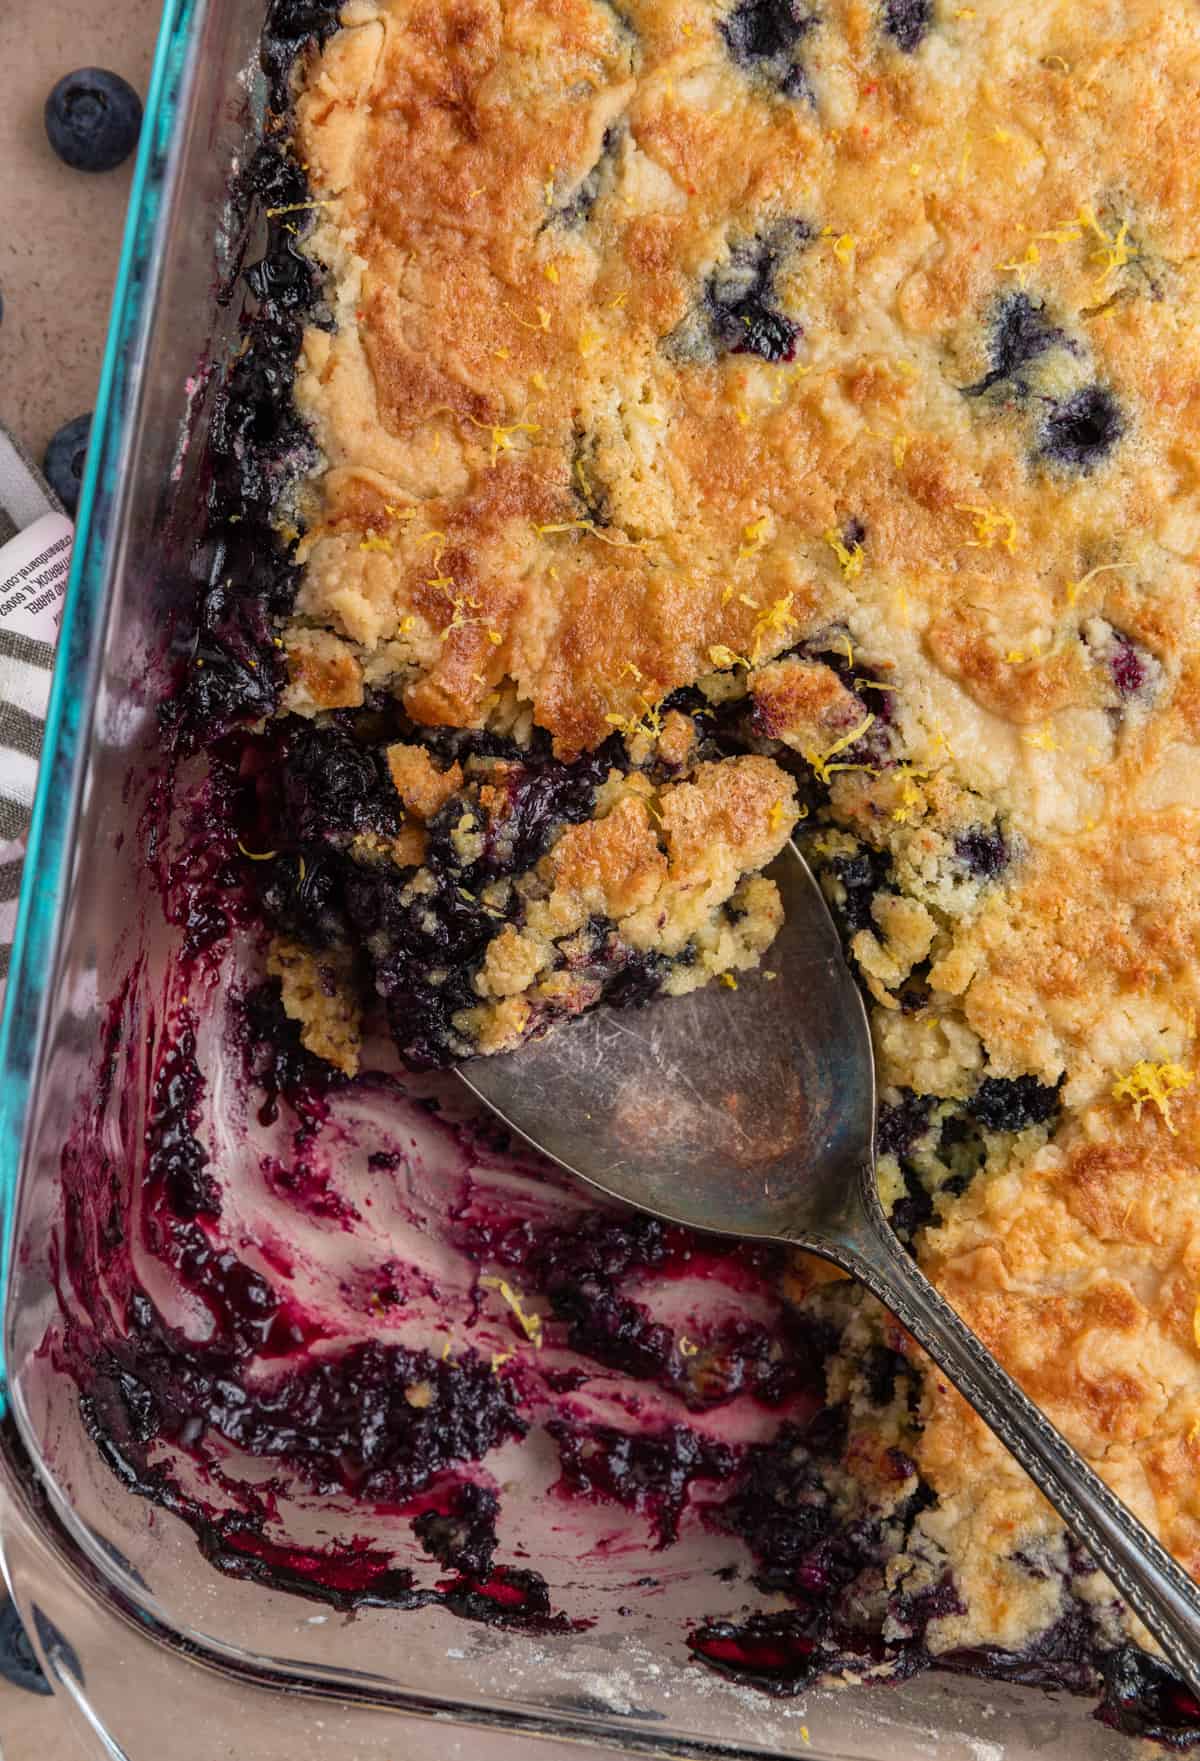 Pan with blueberry dump cake and serving spoon scooping up part with lemon zest over top.